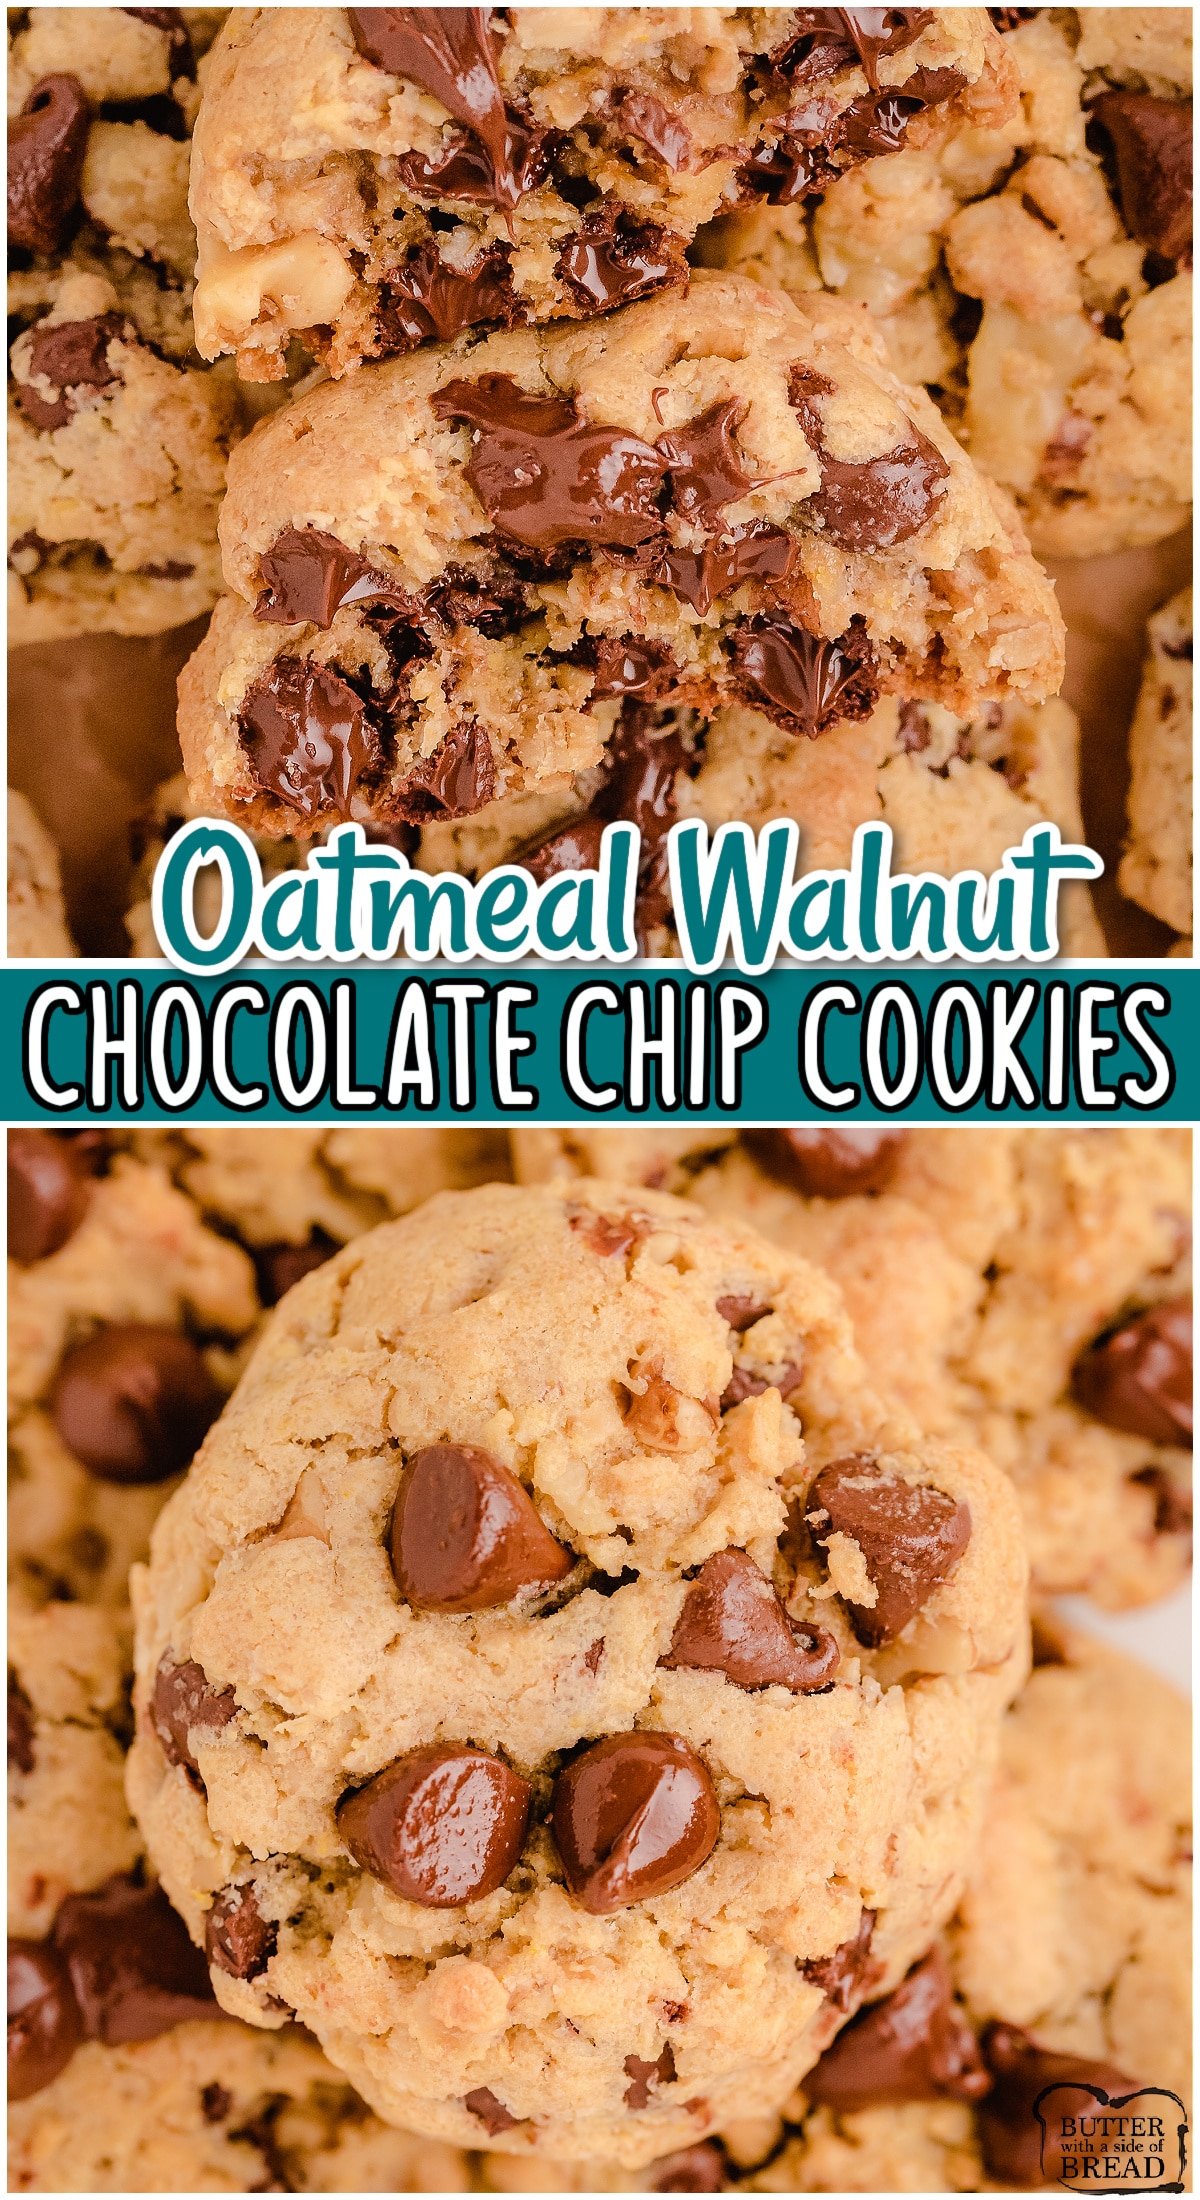 Oatmeal Walnut Chocolate Chip cookies that are soft, chewy and studded with tons of chocolate! These loaded oatmeal cookies have crisp buttery edges & gooey centers; they're the perfect cookie!